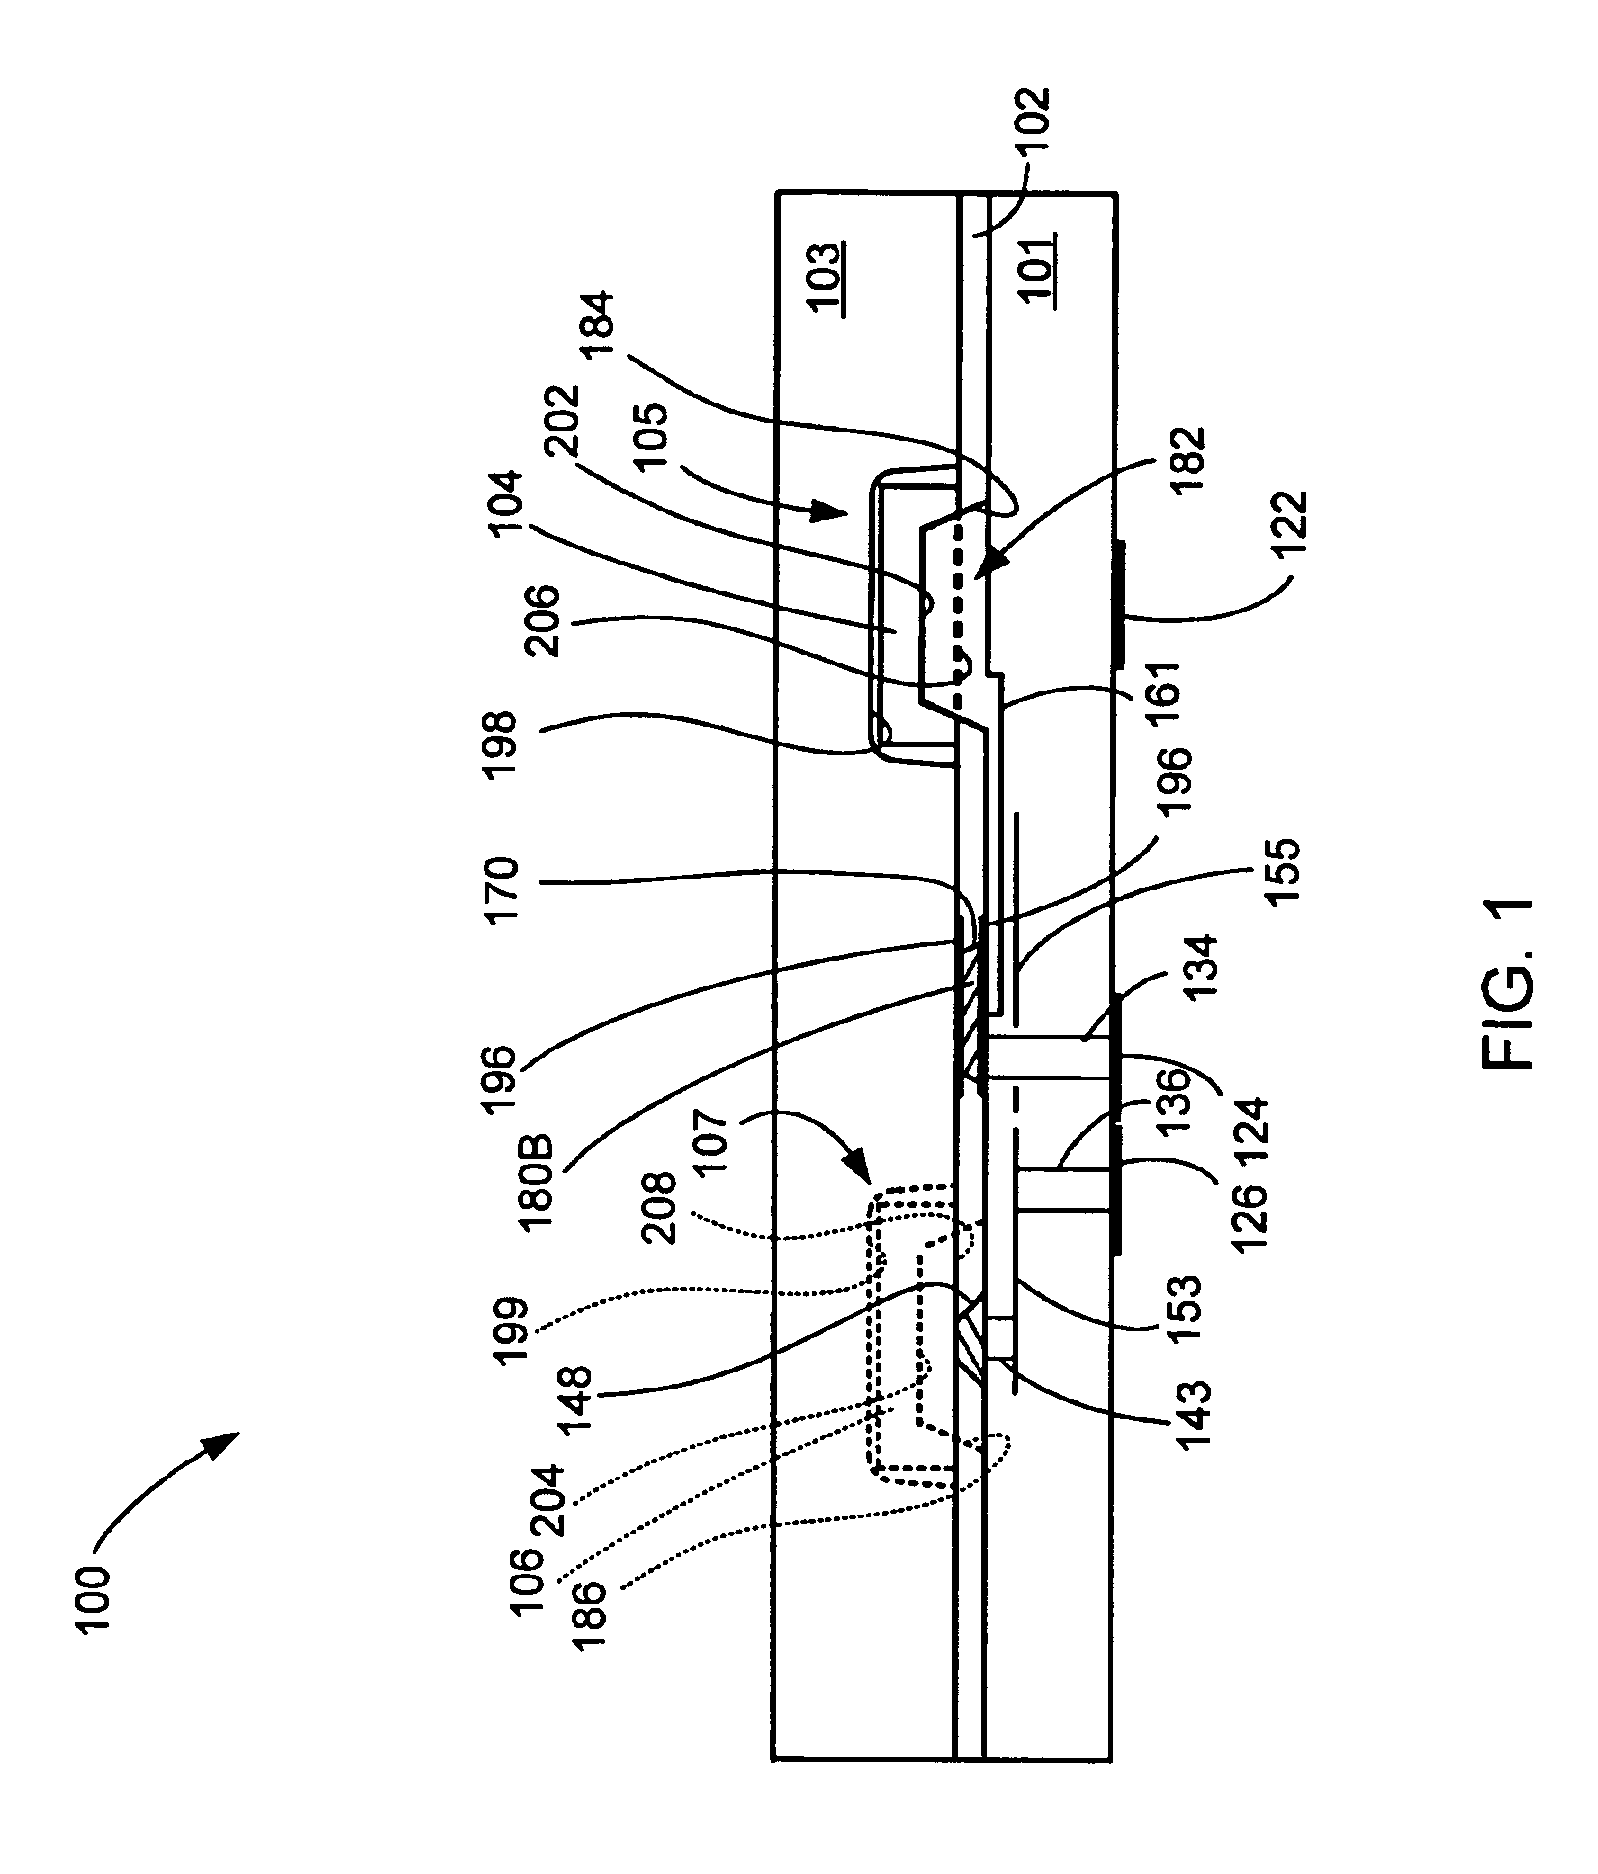 Surface joined multi-substrate liquid metal switching device